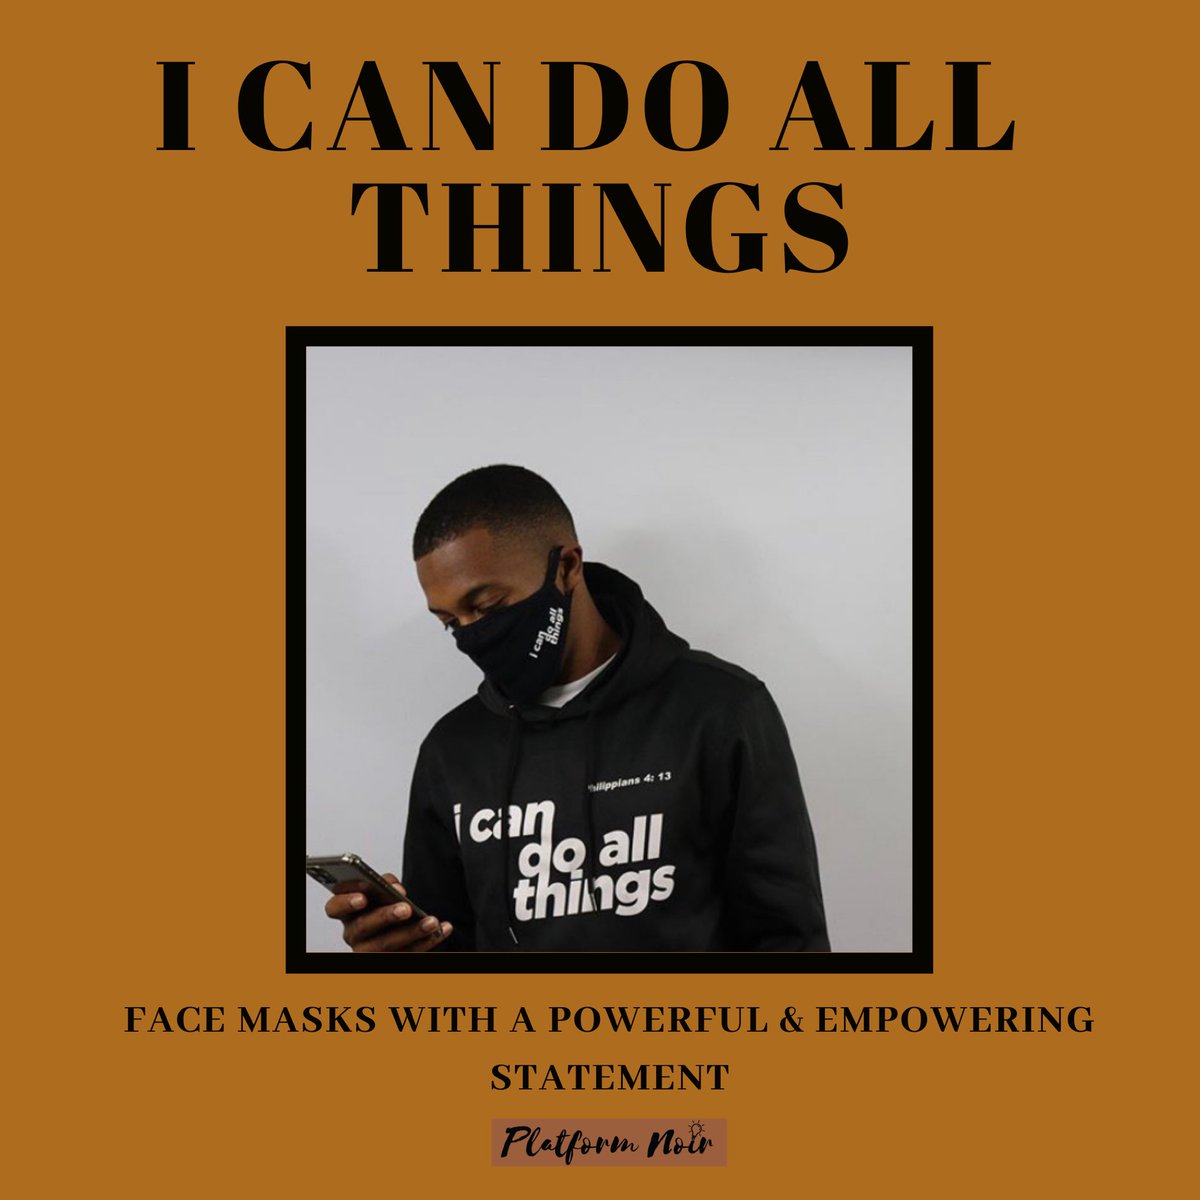 I Can Do All Things ( @ICanDoAllThxngs)Face masks with a powerful & empowering statement  https://icandoallthings.co.uk/  https://instagram.com/icandoallthxngs?igshid=dw01g437aj7o